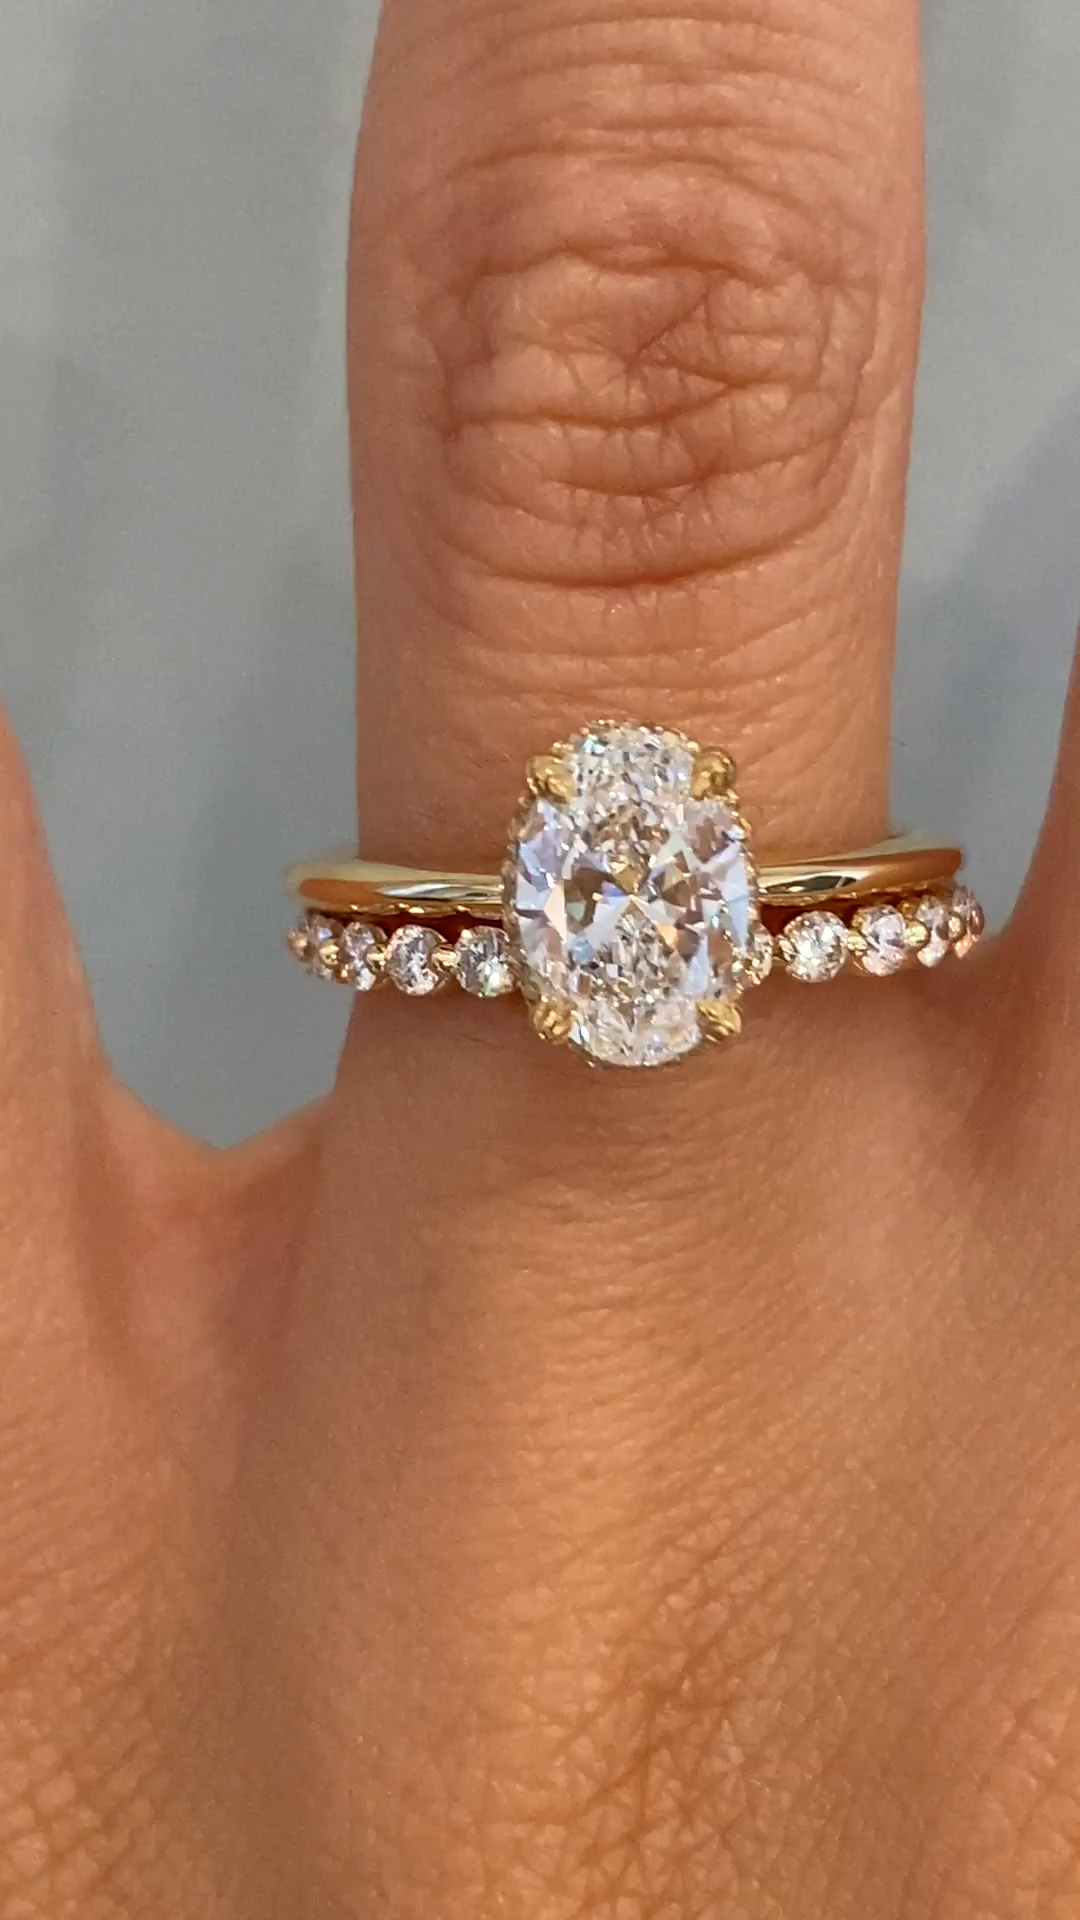 The Ultimate Guide to Buying a Gold Ring
with Diamond